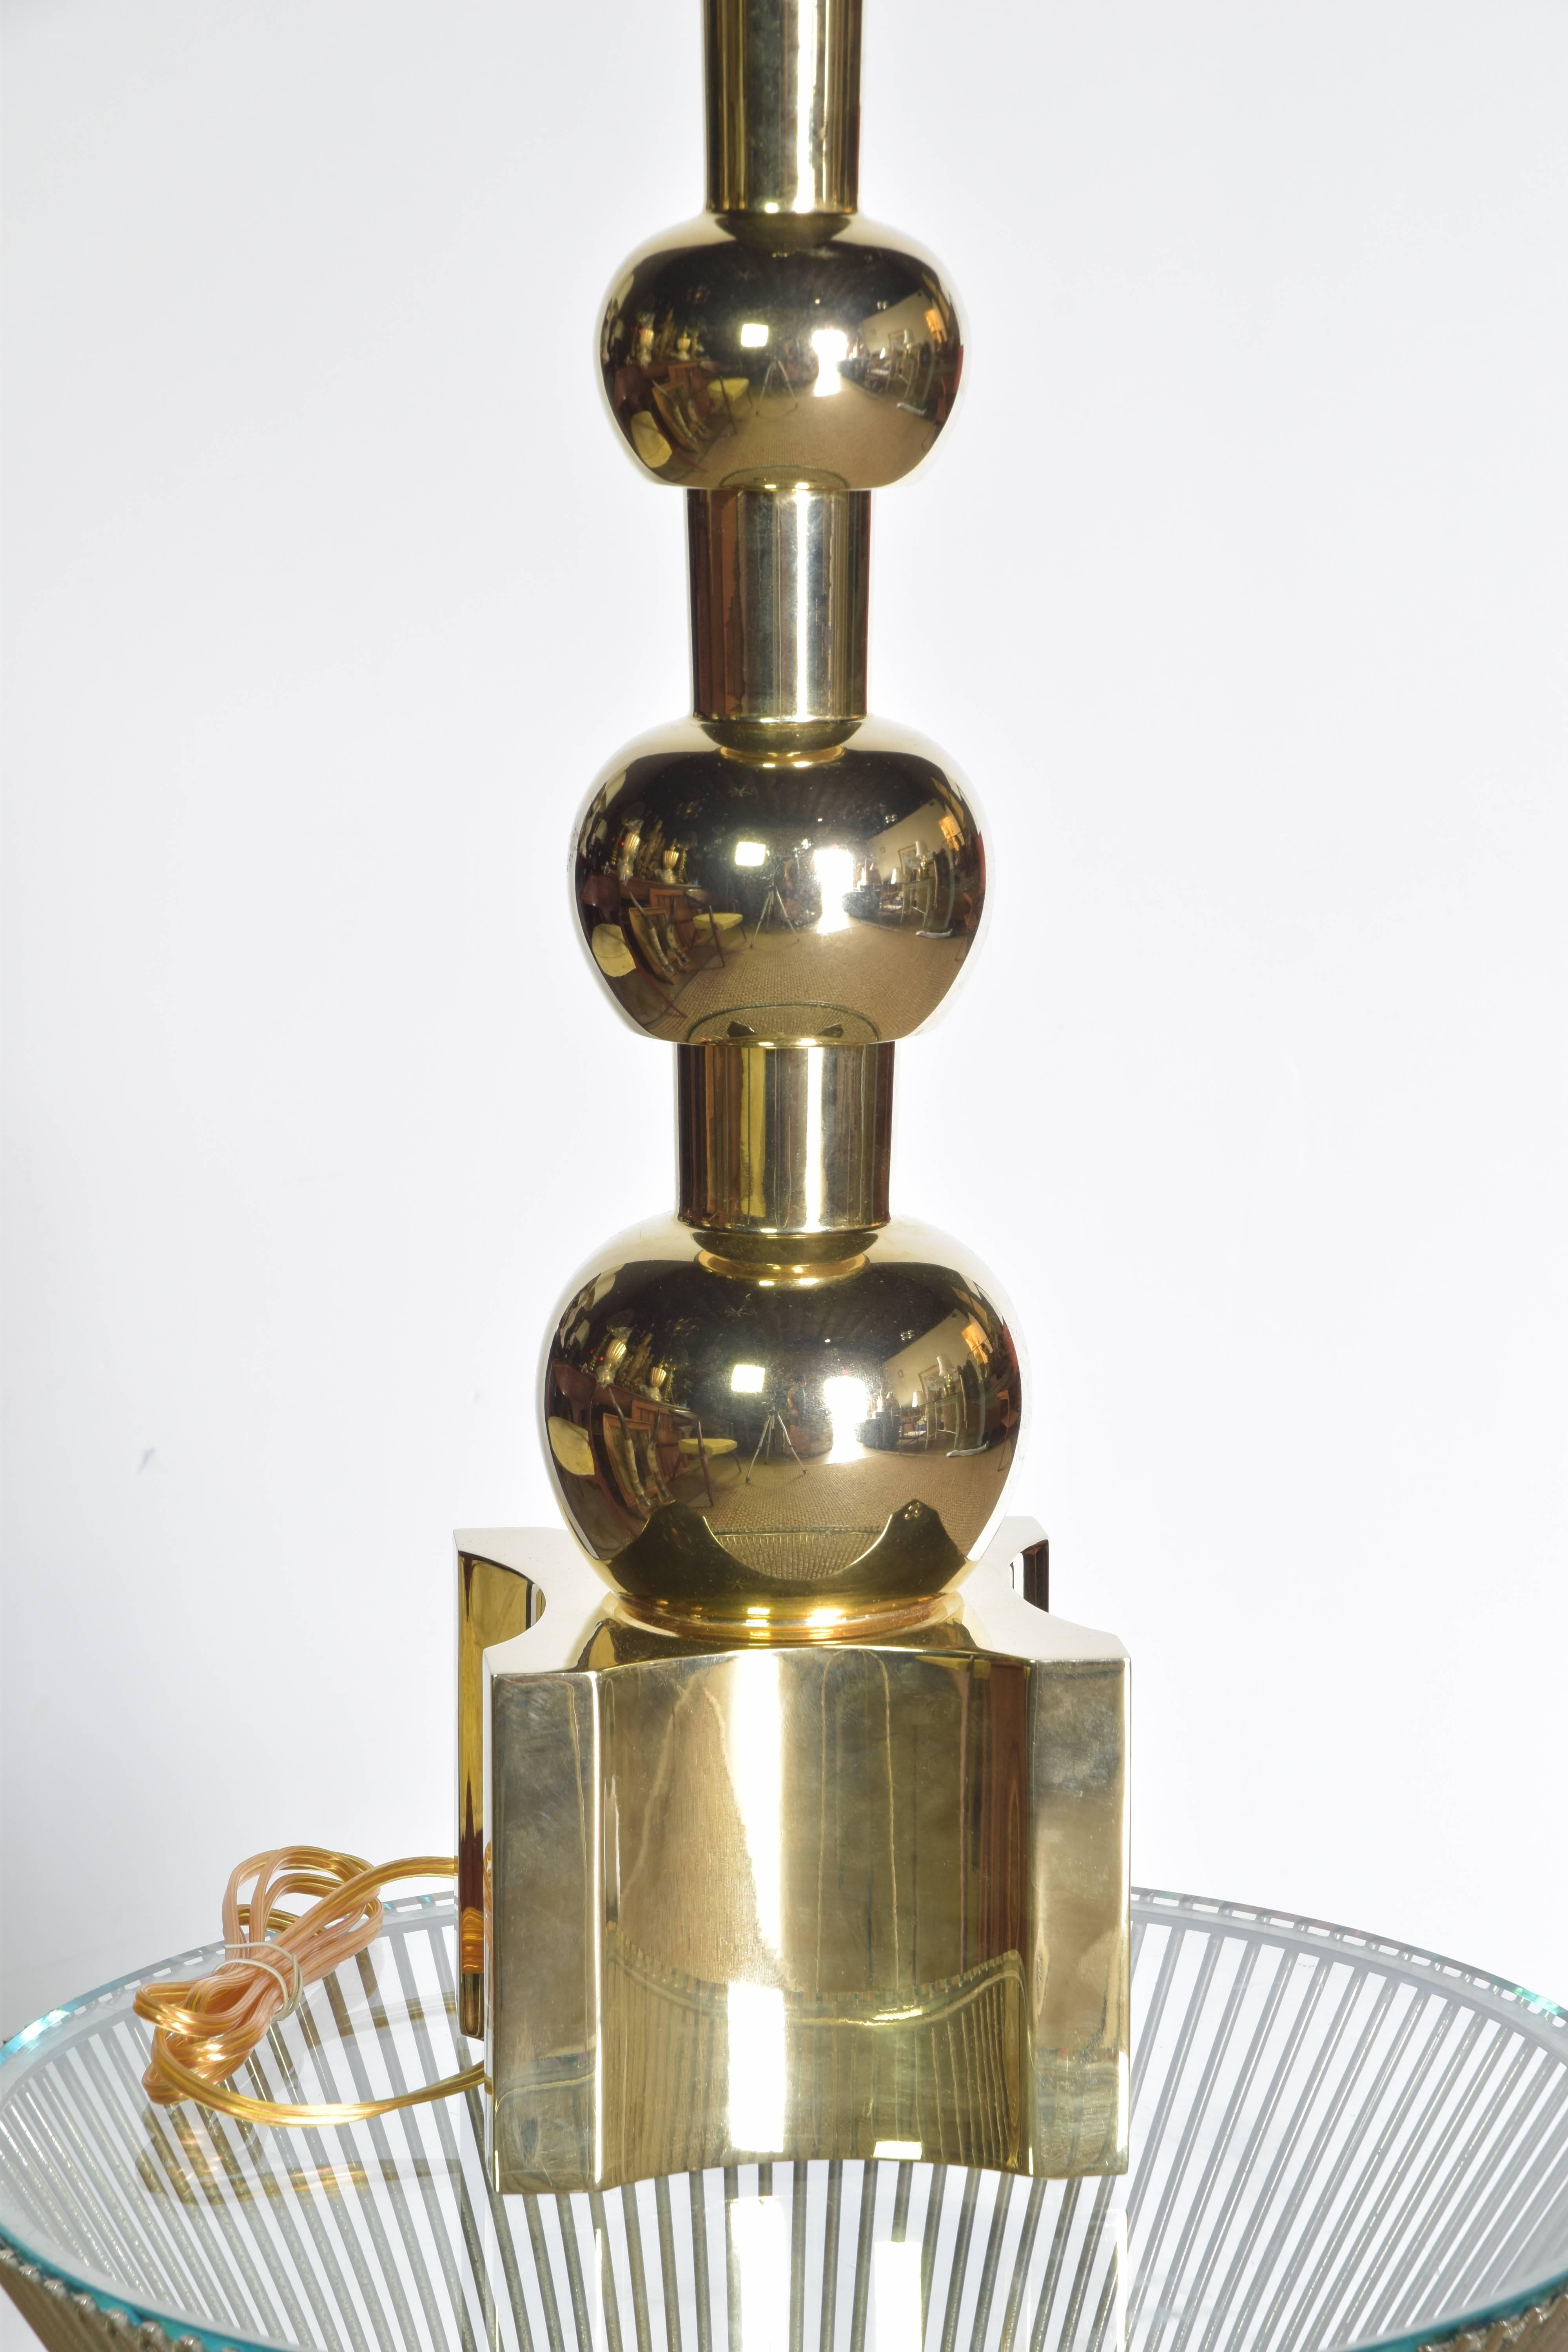 Mid-Century Modern Stiffel brass lamp with a stepped ball design. This unlacquered brass lamp has been perfectly restored with new brass plating and new wiring. 
Lamp measures 33